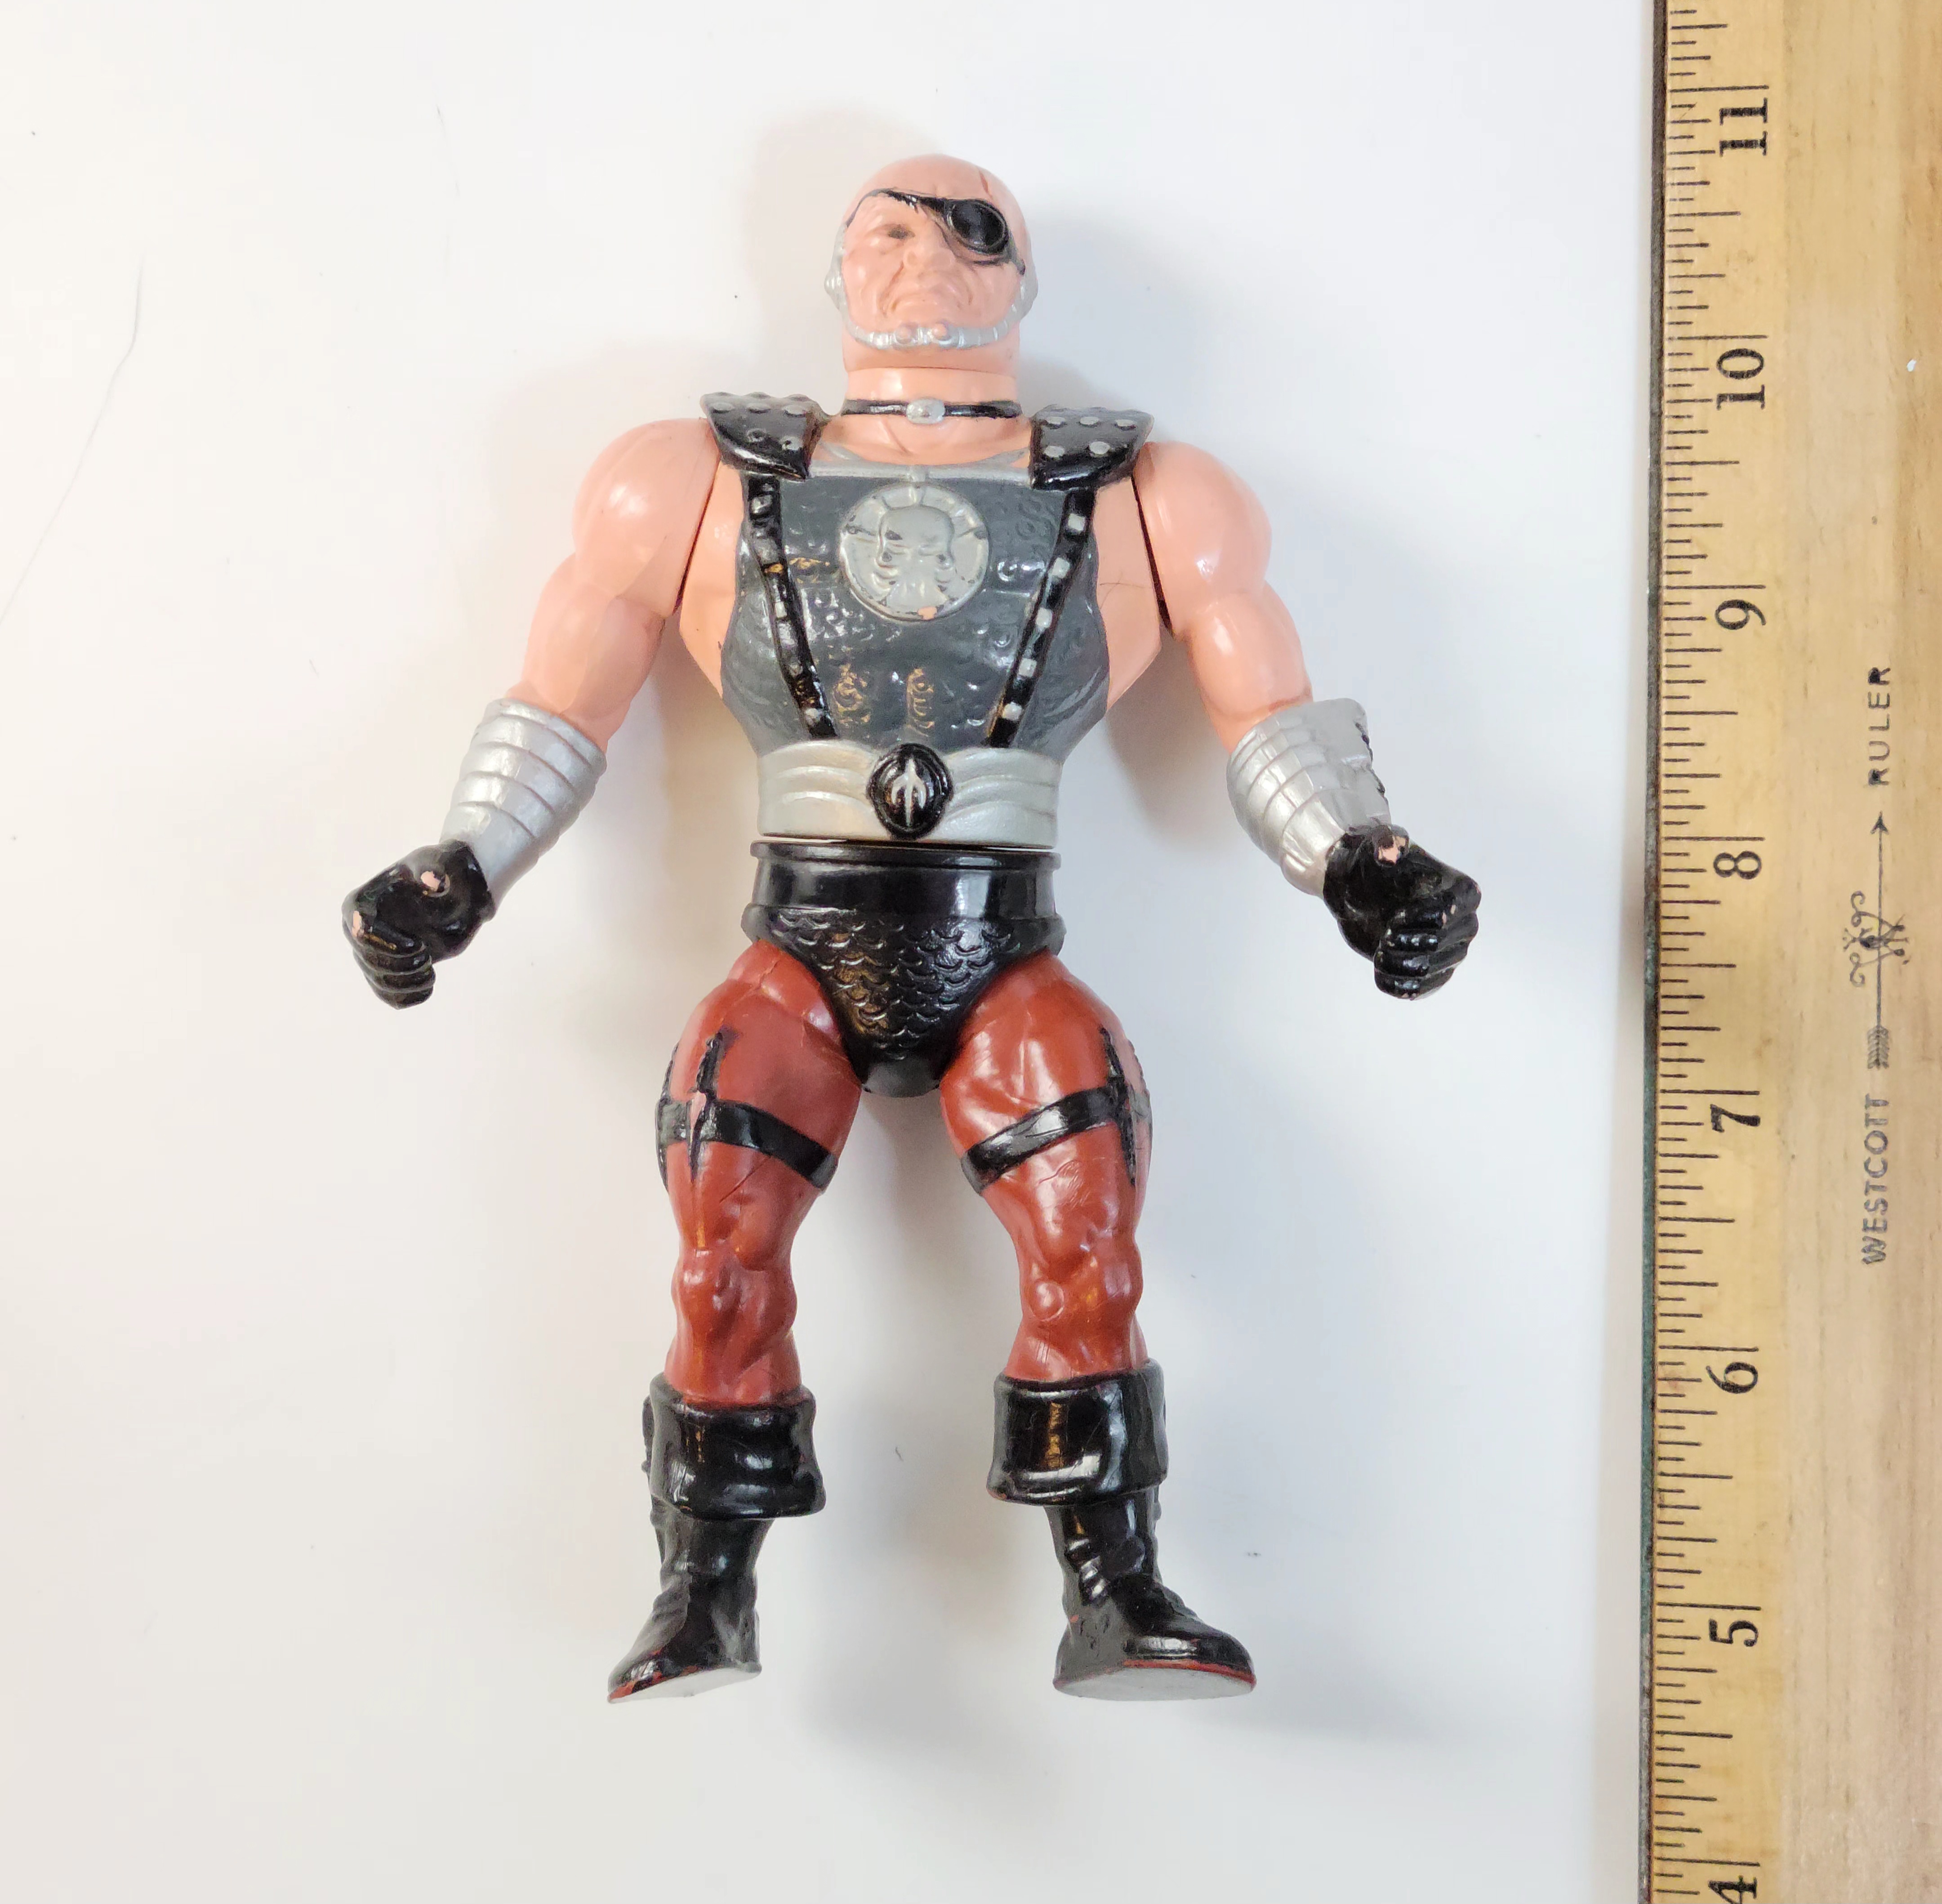 Movie Blade 1987 Masters of the Universe Vintage He Man Action Figure Toy